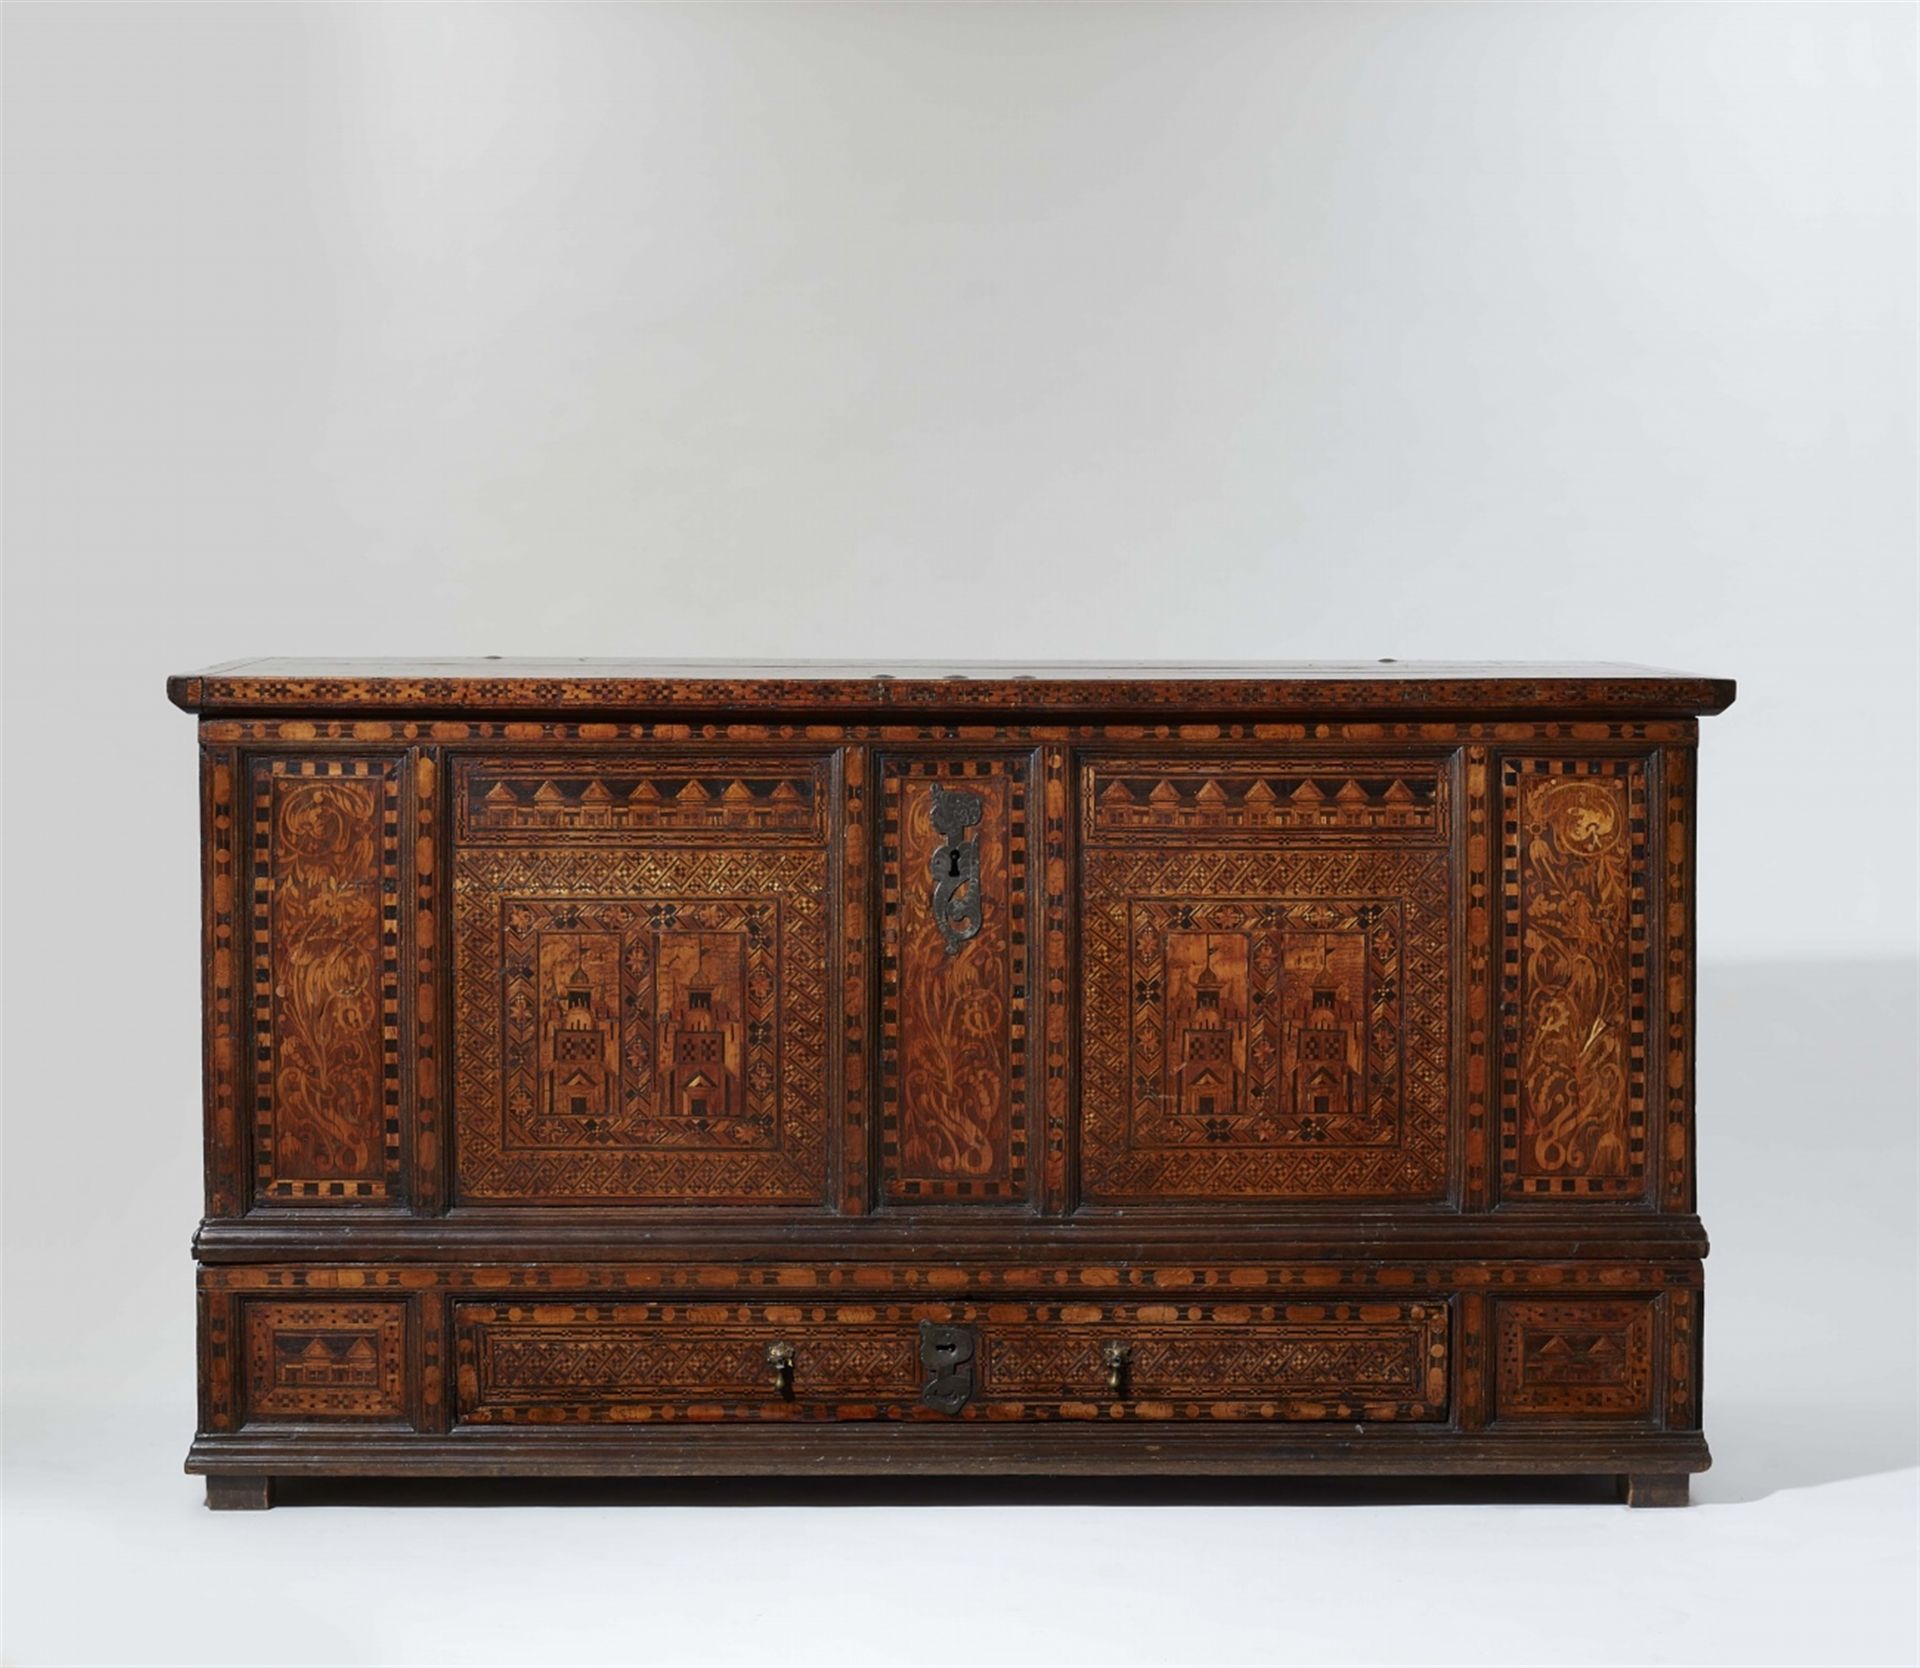 A wooden chest with Mannerist architectural motifs